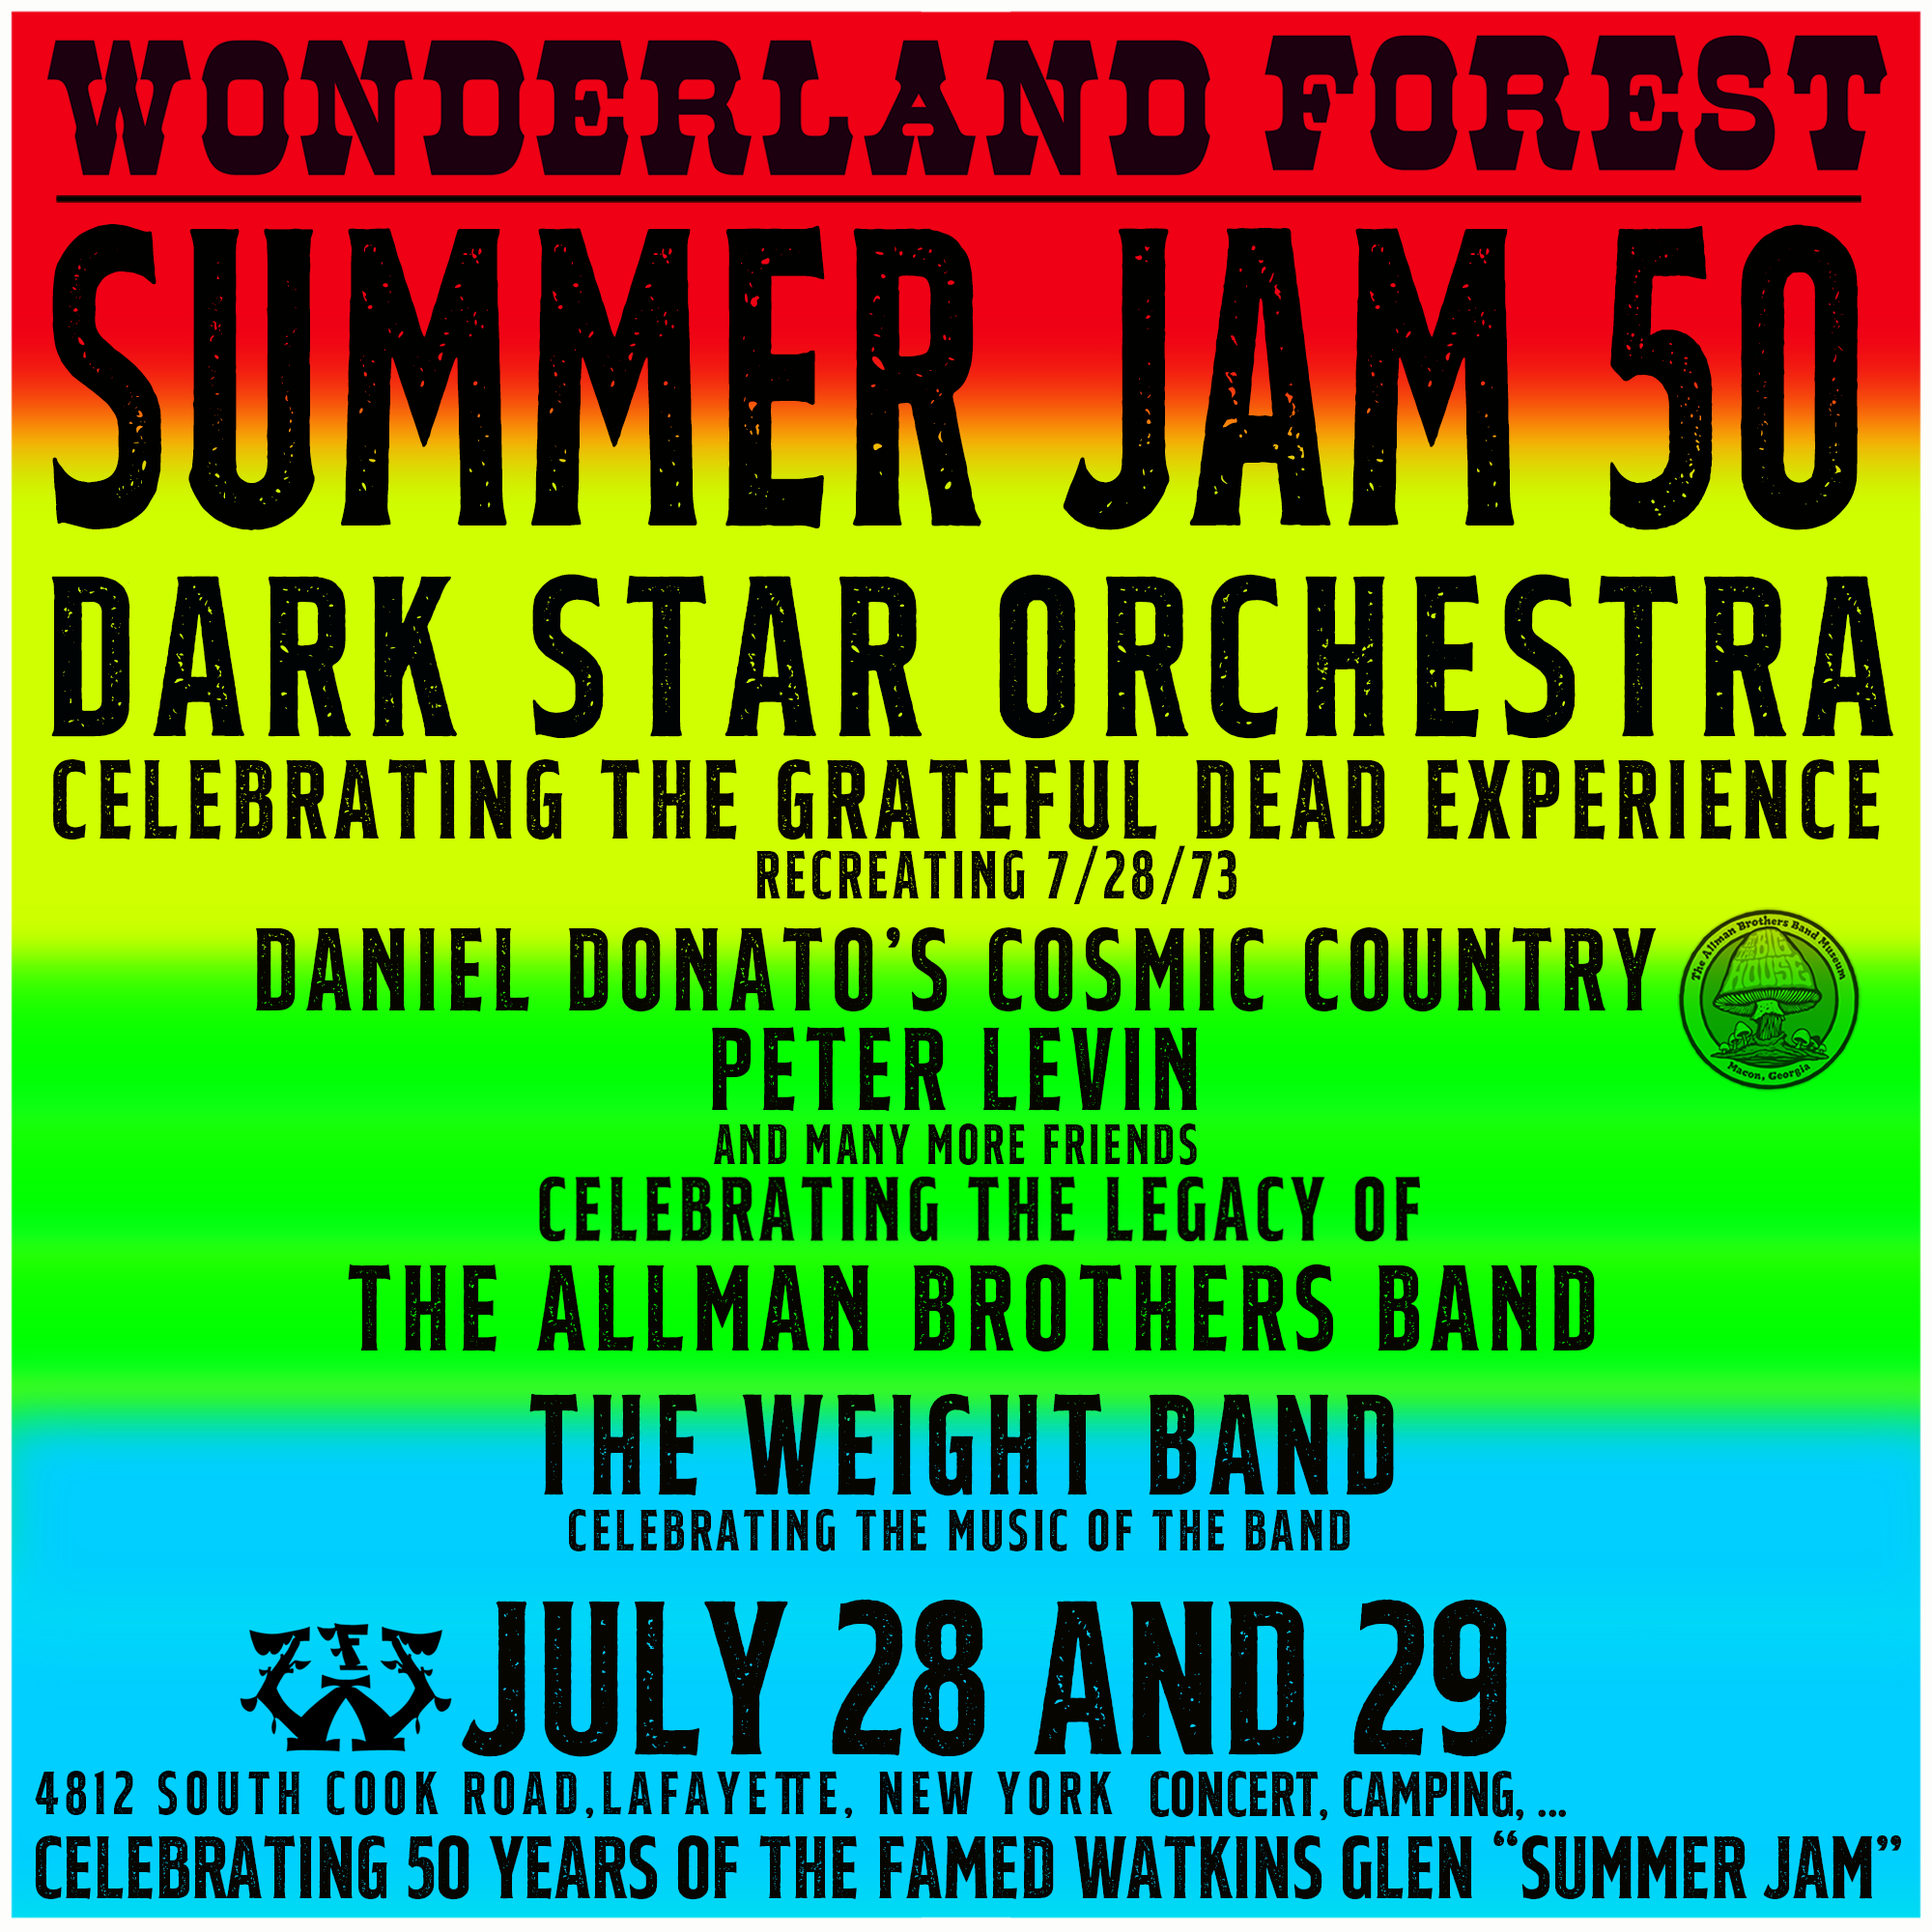 Introducing ‘Summer Jam 50’ As The Inaugural Event at Wonderland Forest July 28 & 29